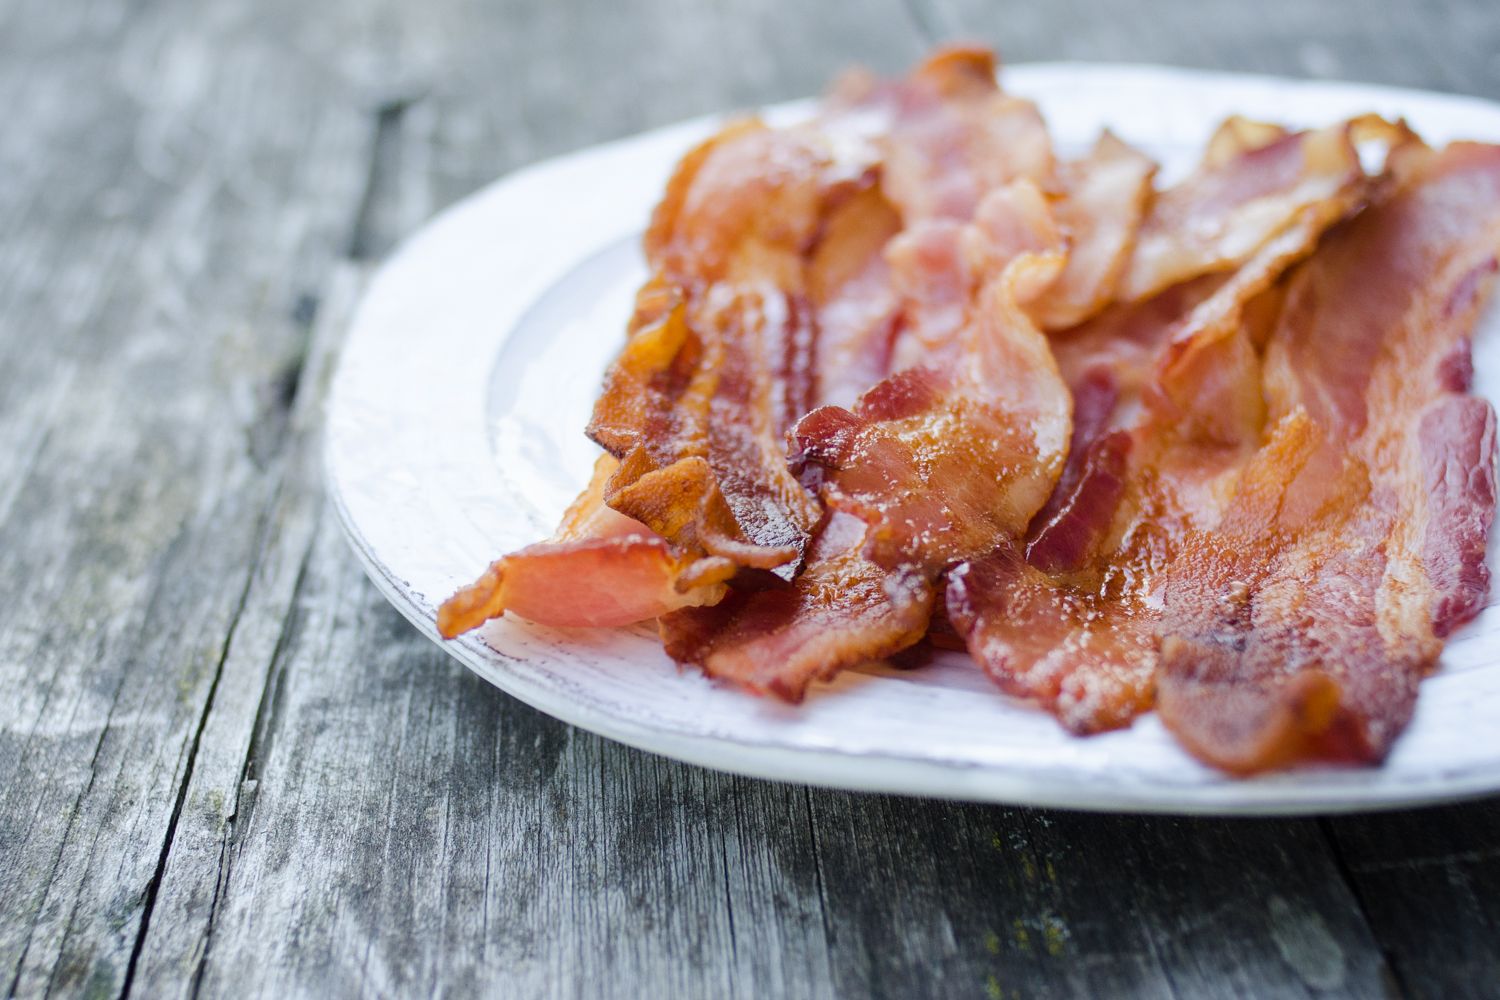 https://hips.hearstapps.com/thepioneerwoman/wp-content/uploads/2015/09/how-to-cook-bacon-in-the-oven-00.jpg